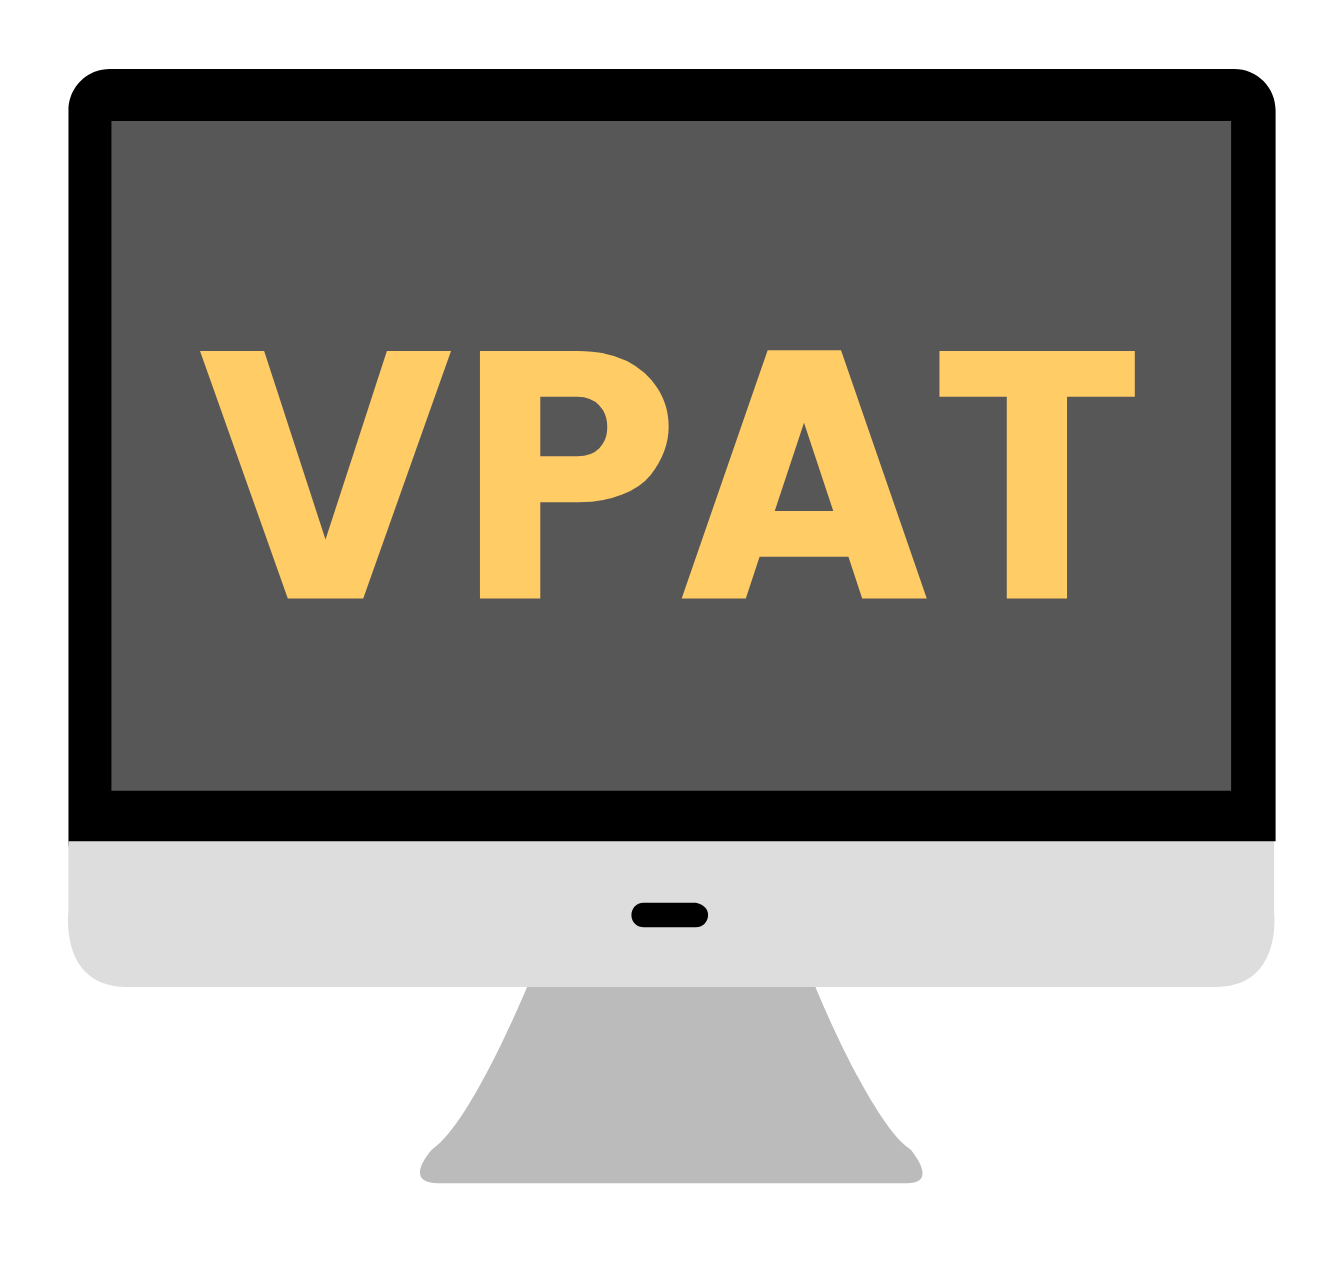 Computer monitor displaying the acronym VPAT, which stands for Voluntary Product Accessibility Template